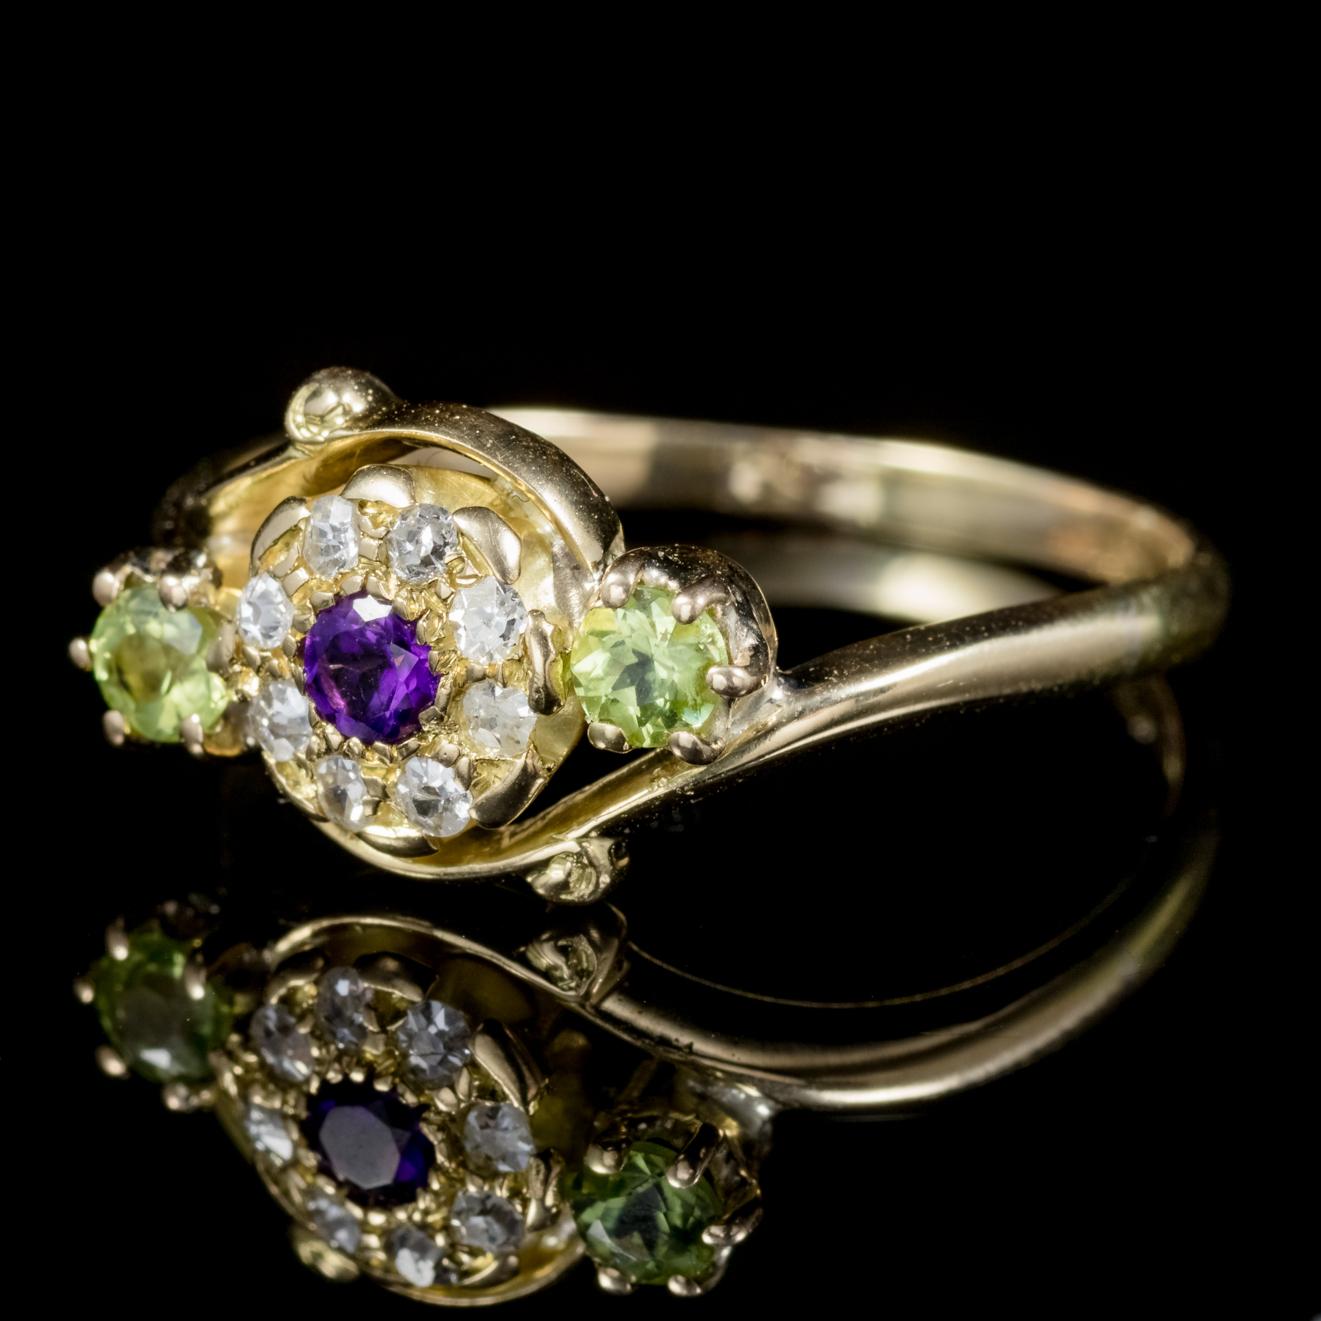 A fancy antique Victorian Suffragette ring C. 1900, set with a violet 0.09ct Amethyst in the centre, flanked by two 0.09ct Peridots and a halo of Diamonds which are 0.02ct each. 

Suffragettes liked to be depicted as feminine, their jewellery